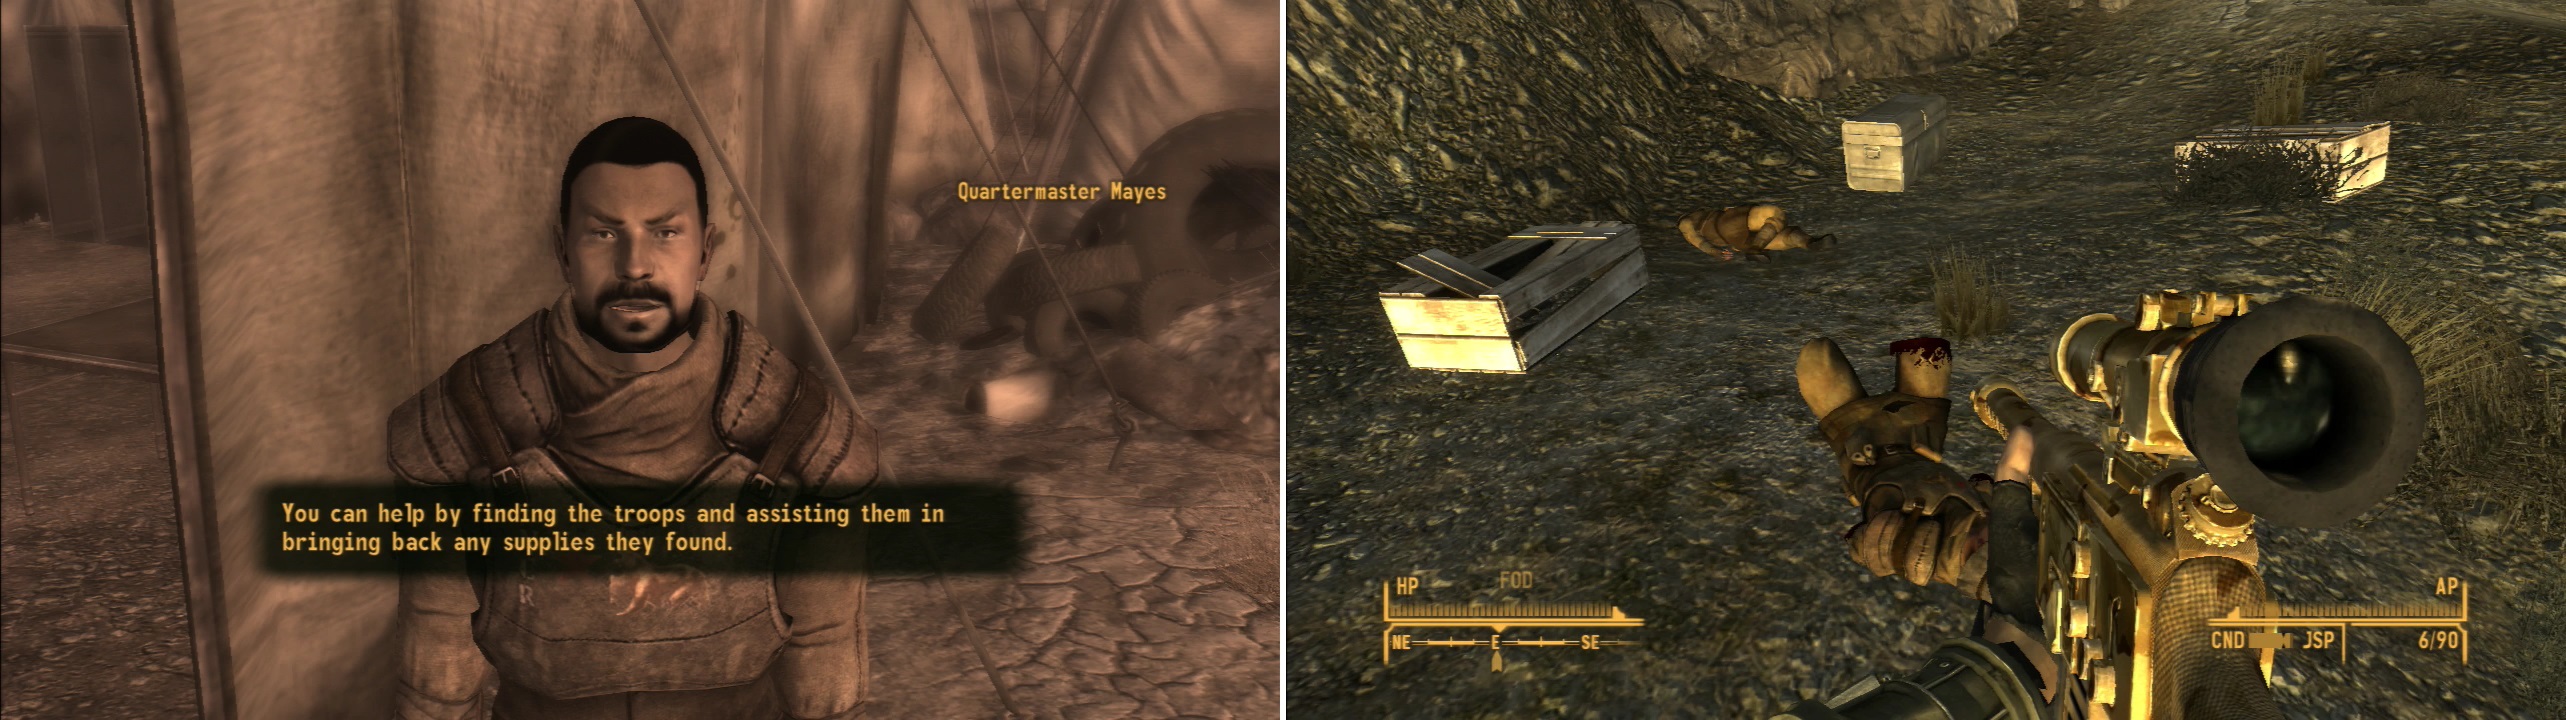 Talk to Quartermaster Mayes to learn about a wayward shipment of supplies that Camp Forlorn Hope desperately needs (left). After visiting HELIOS One, find the supplies - and the missing patrol - in the Mojave, victims of a Legion raid (right).